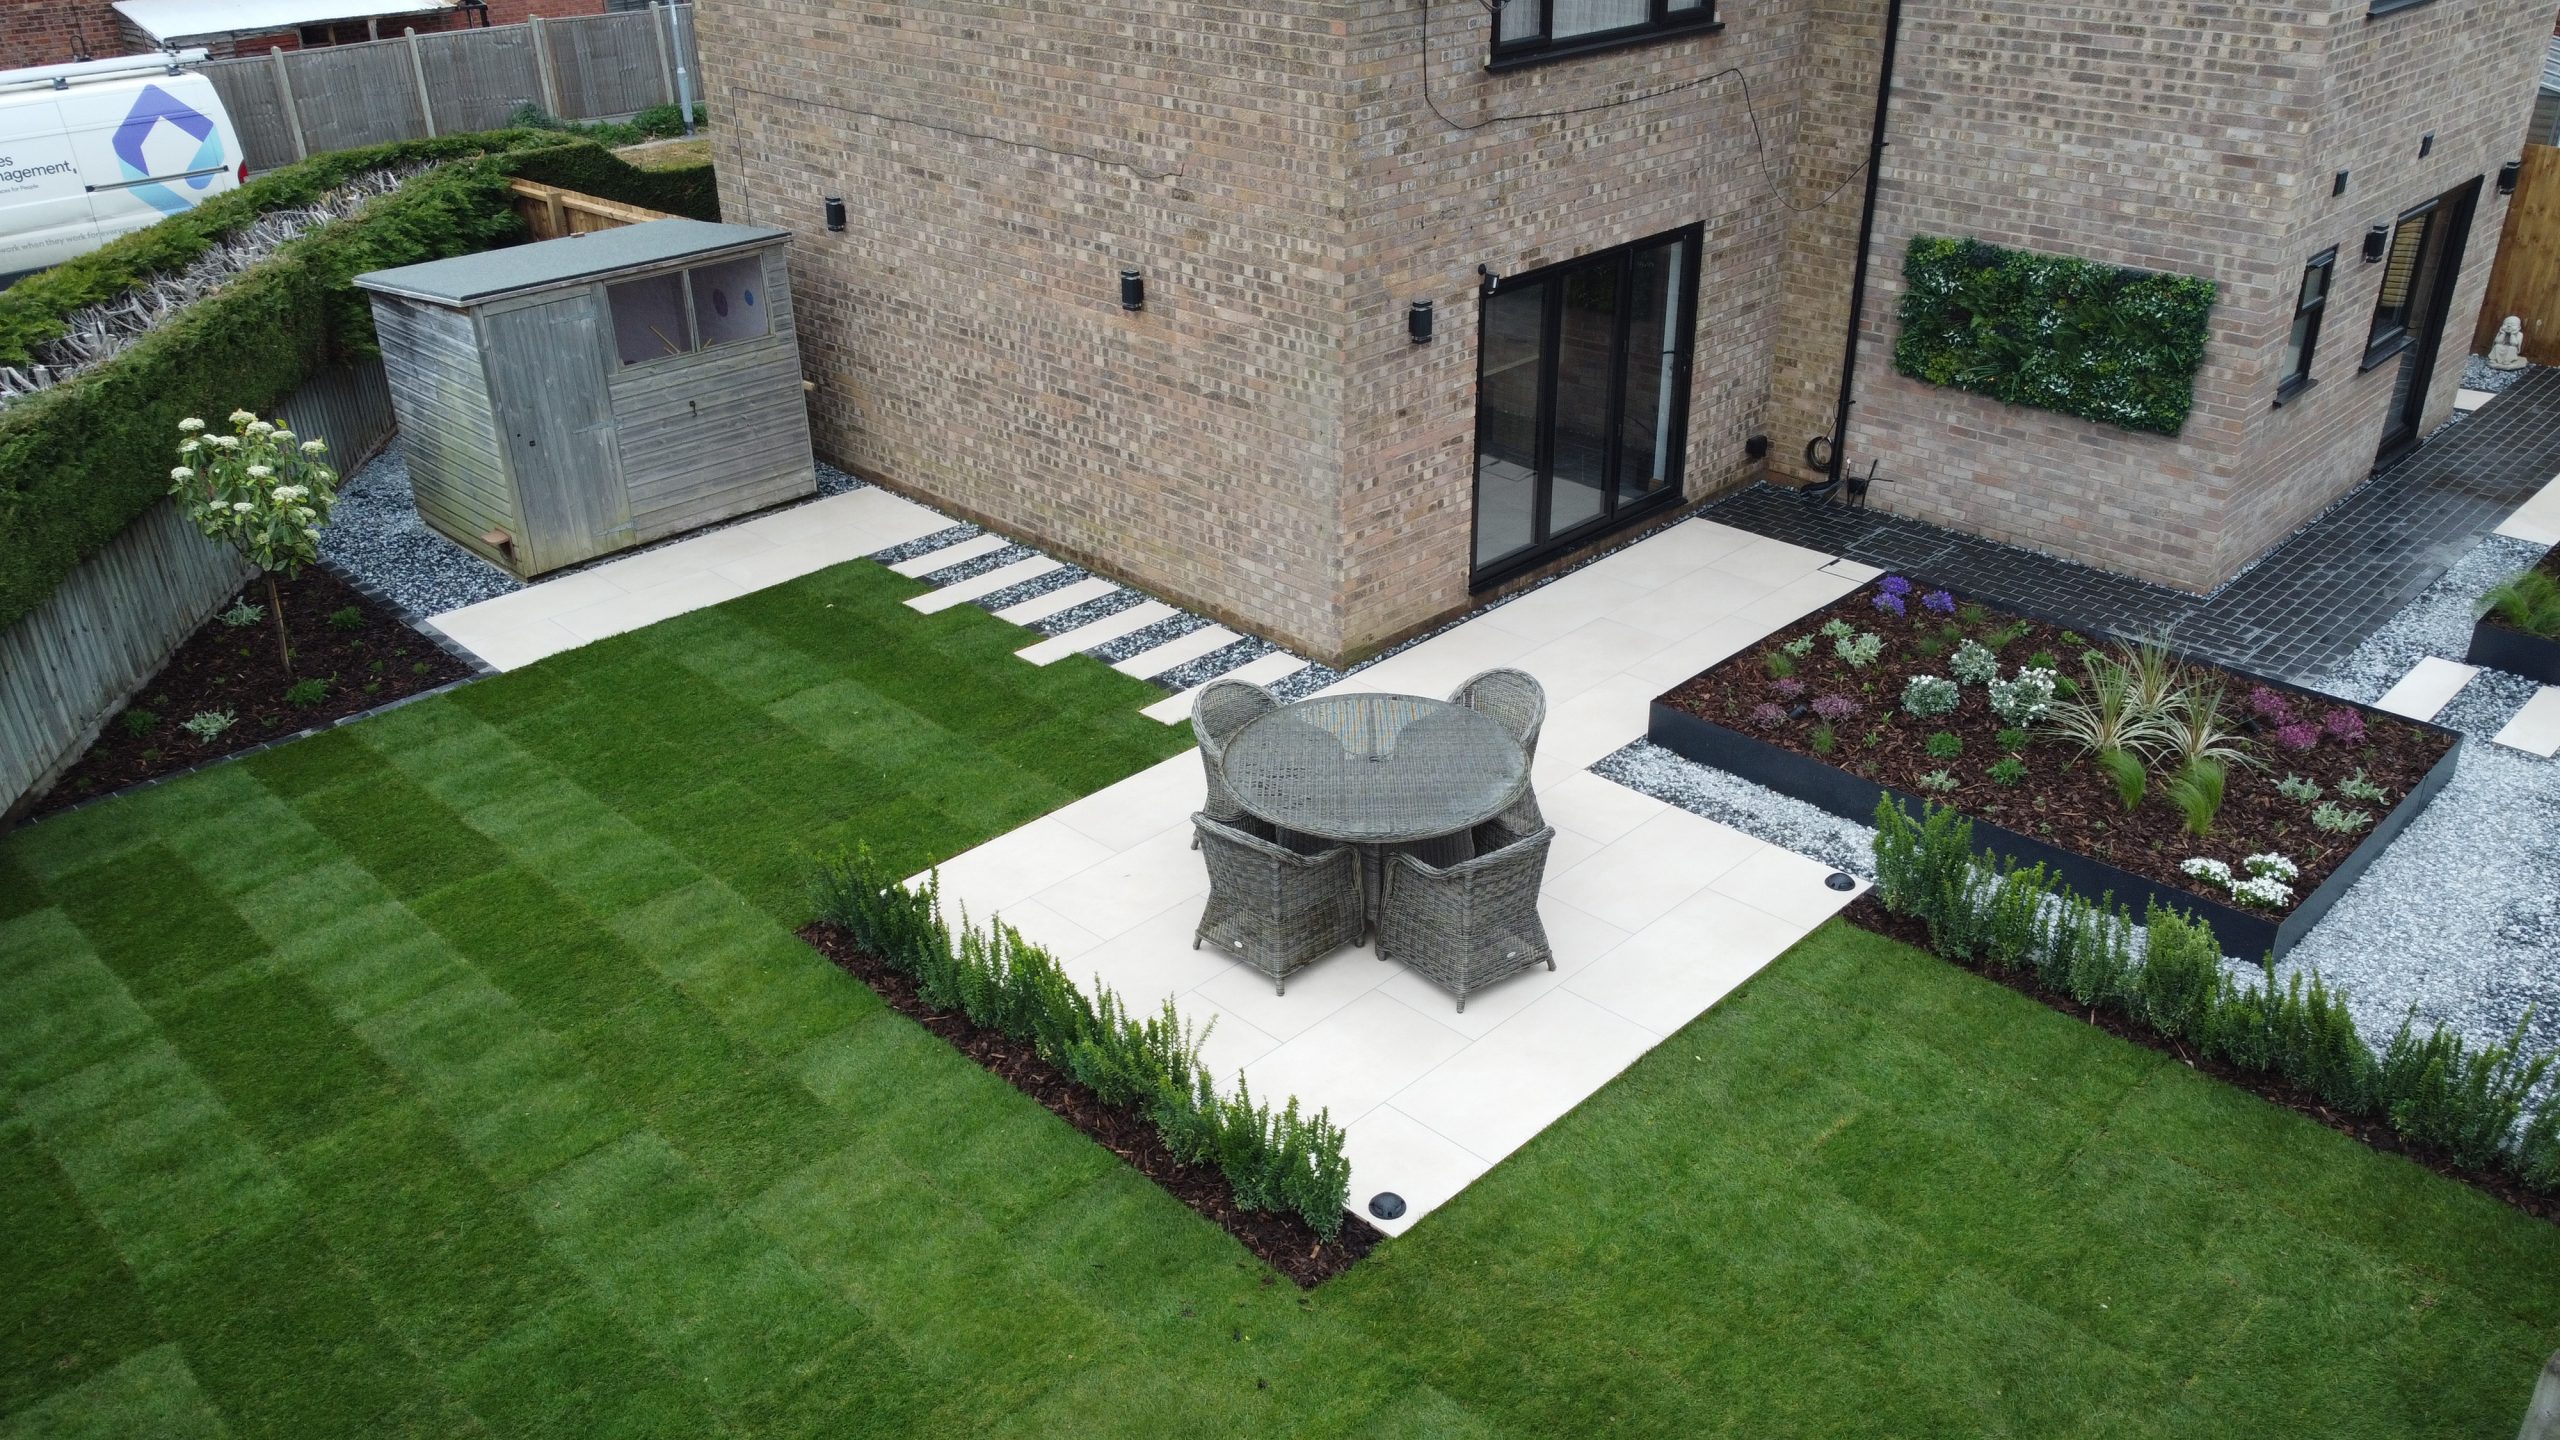 Full redesign and transformation of a garden – Landscaping Cambridge 1